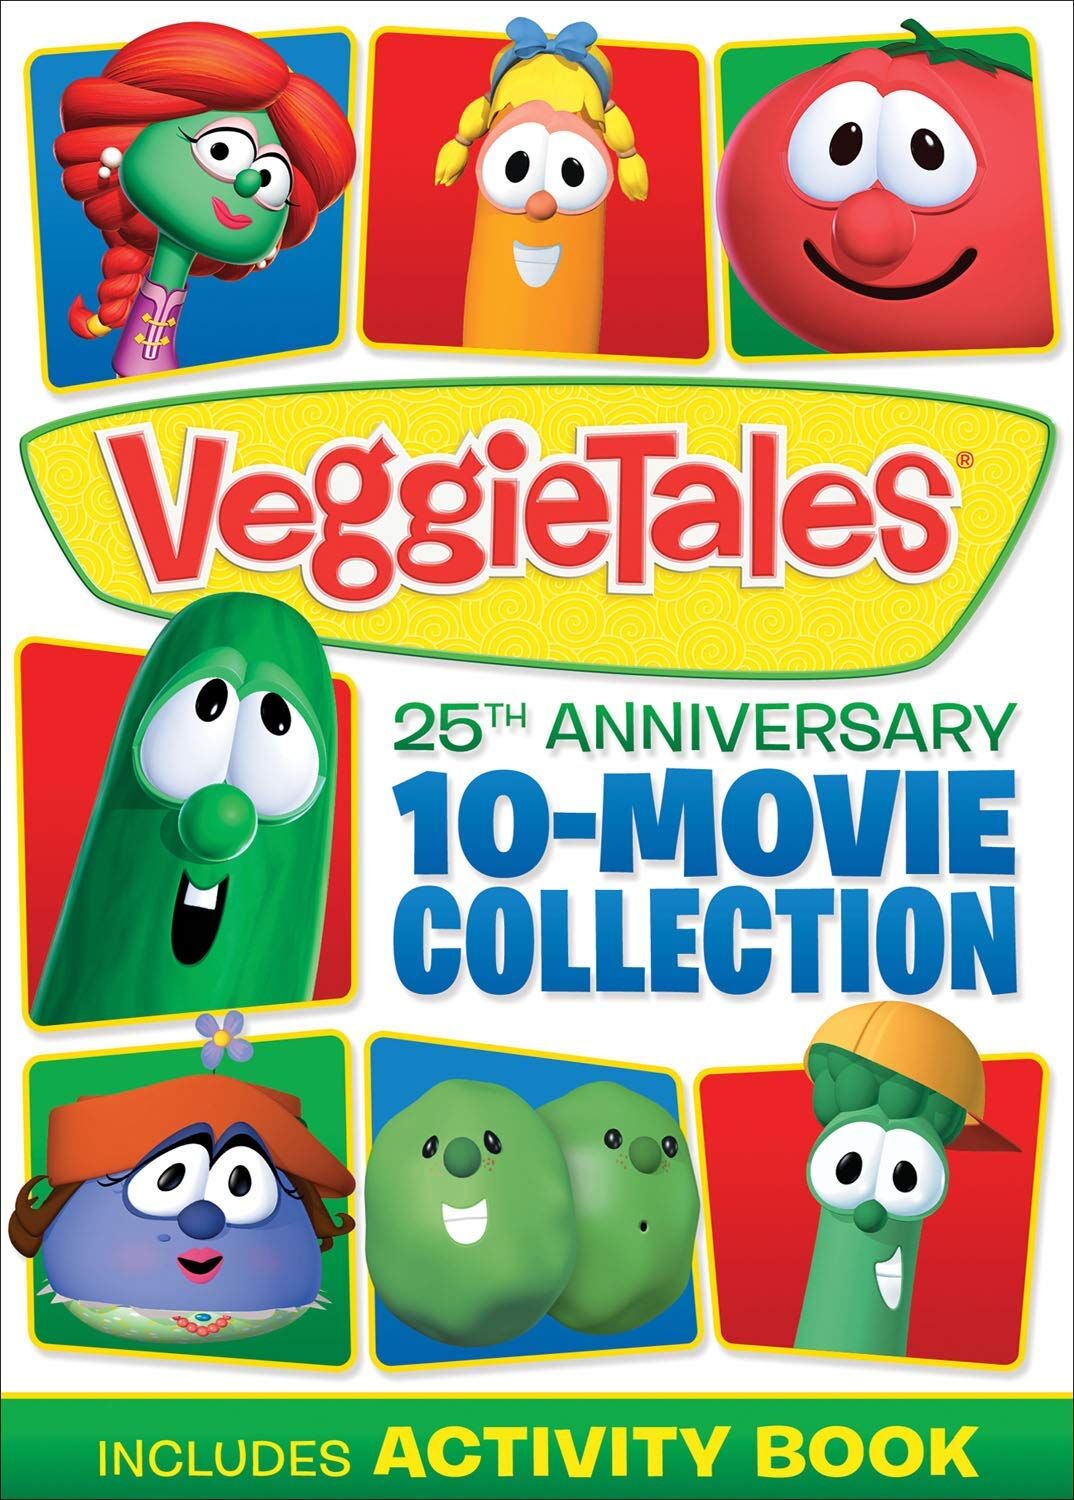 Veggietales - The Pirates Who Don't Do Anything DVD-ROM 